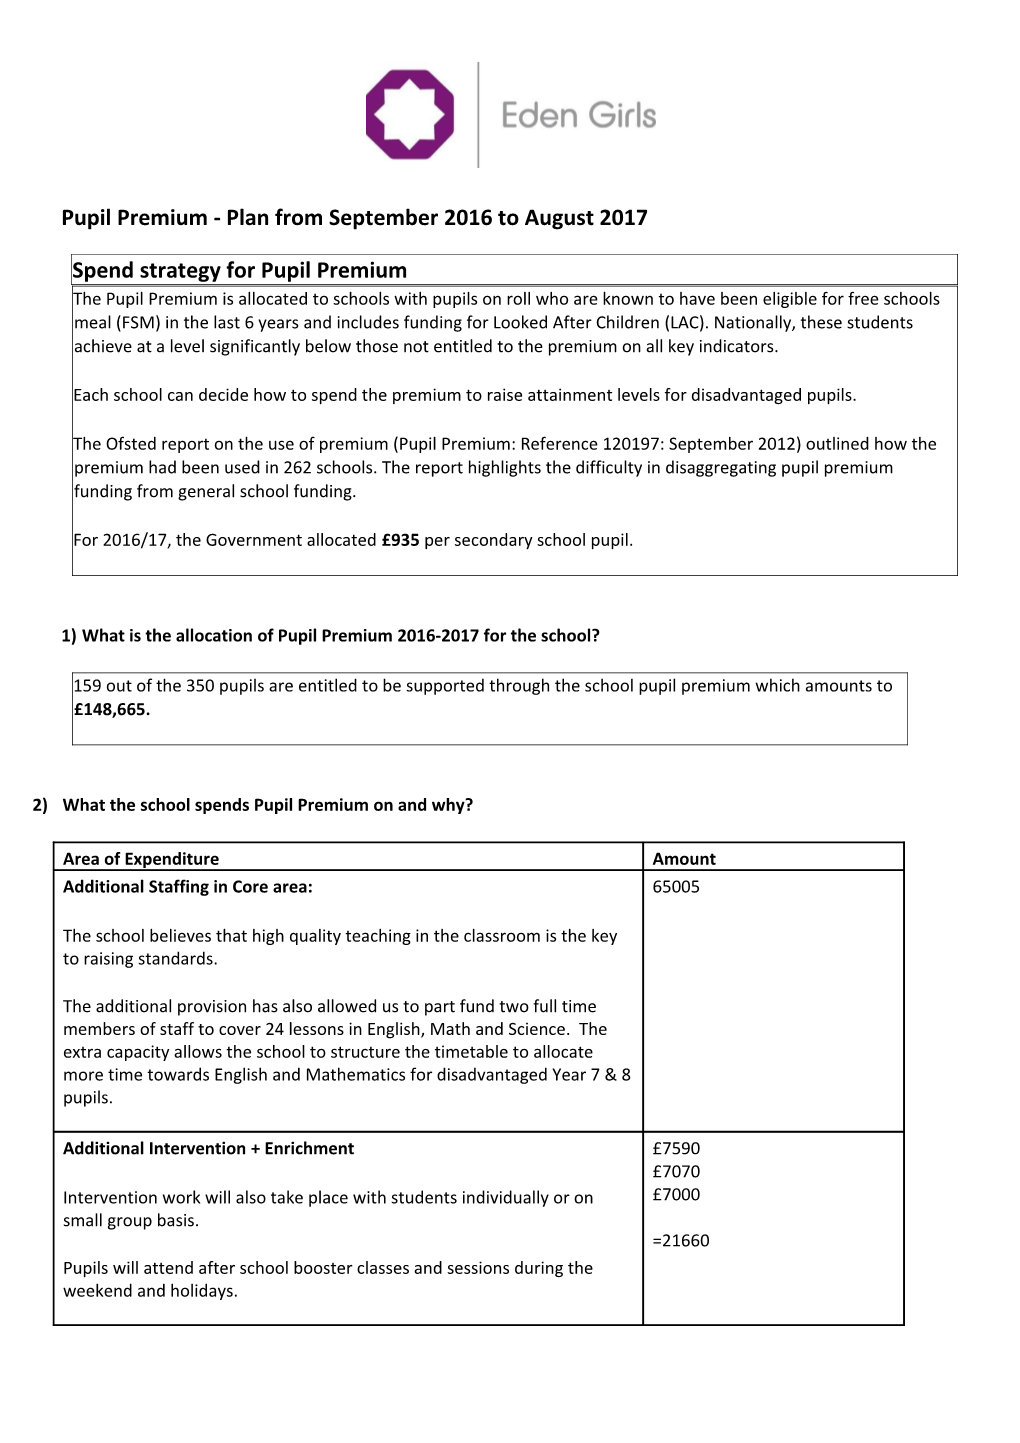 Pupil Premium - Plan from September 2016 to August 2017